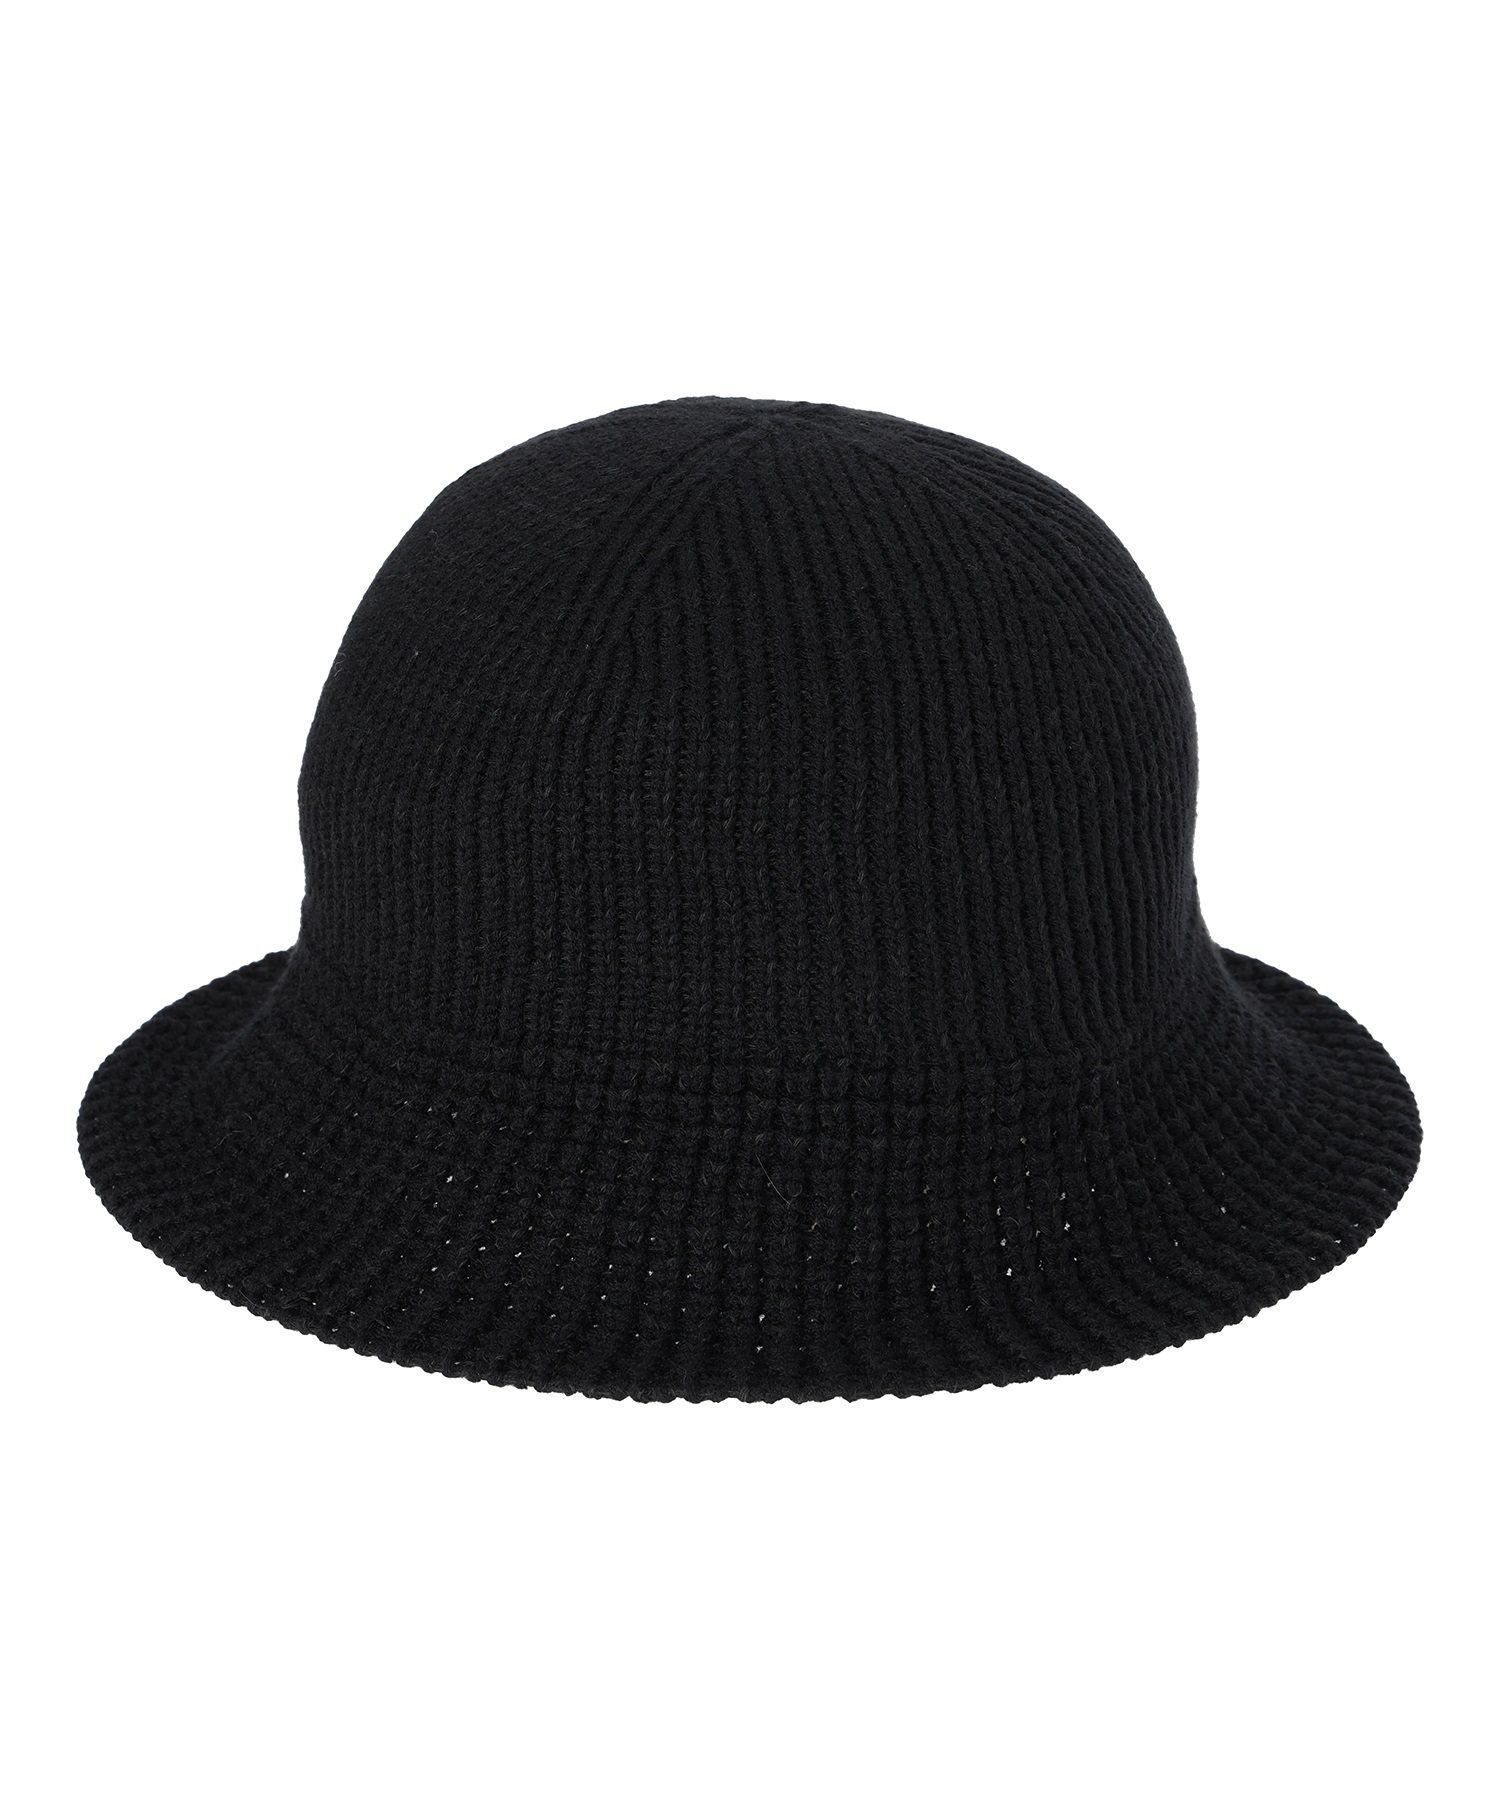 Dickies ディッキーズ MS KNIT HAT 80265000 ハット(85GY-F)